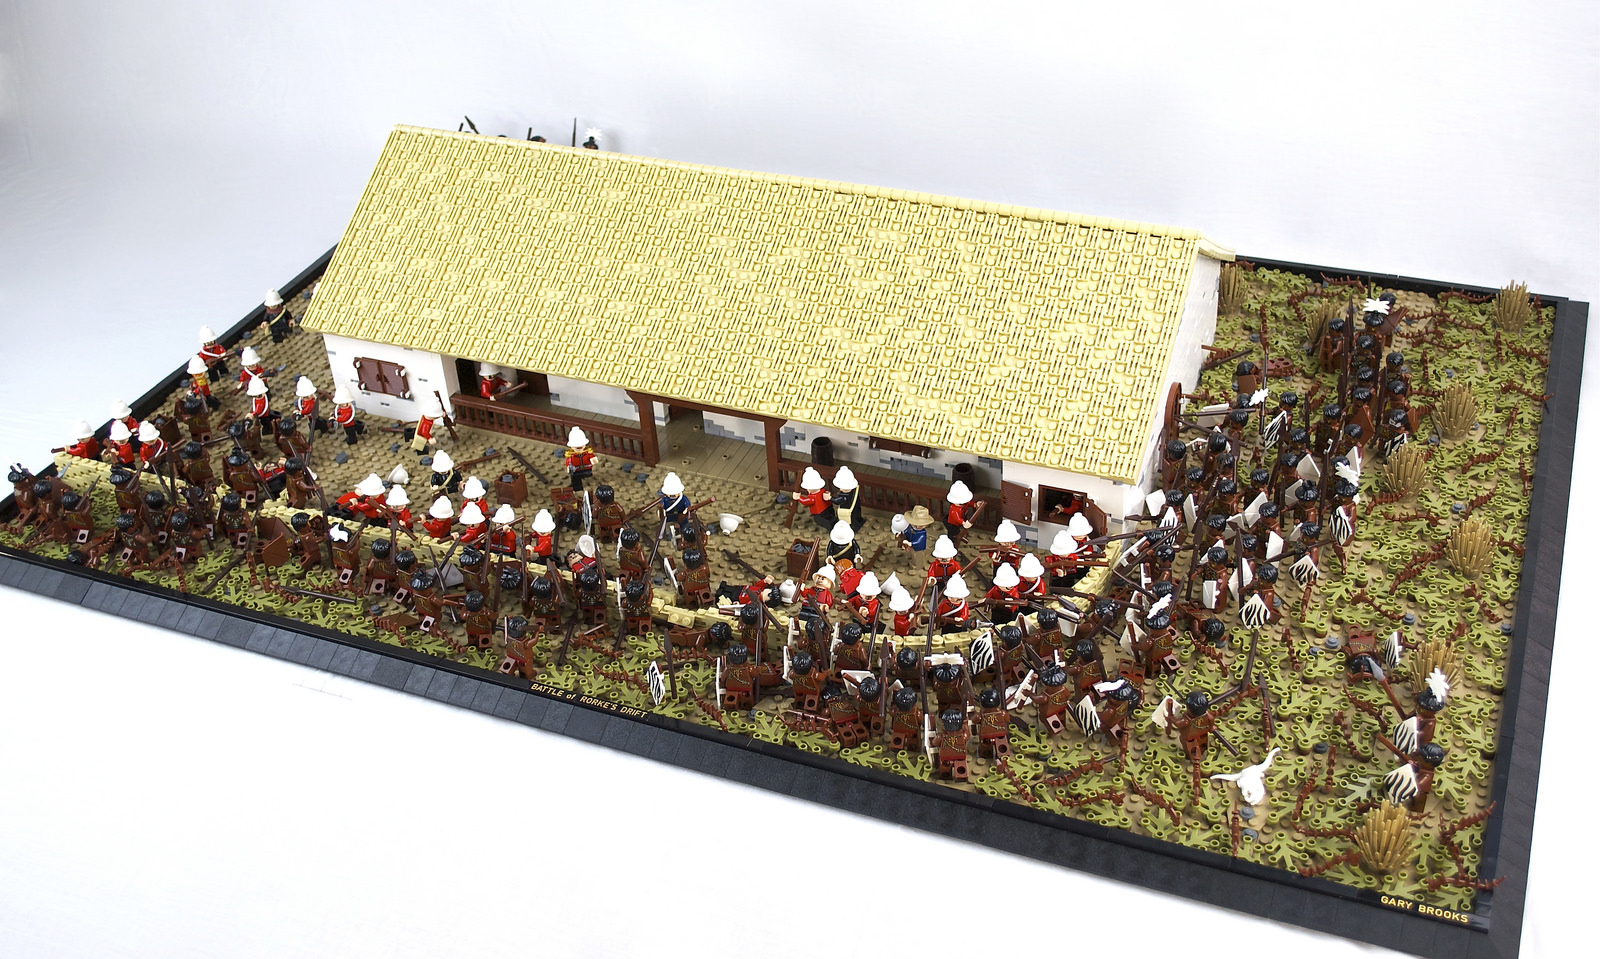 Lego-Bataille-Rorkes-Drift-Guerre-AngloZouloue-4